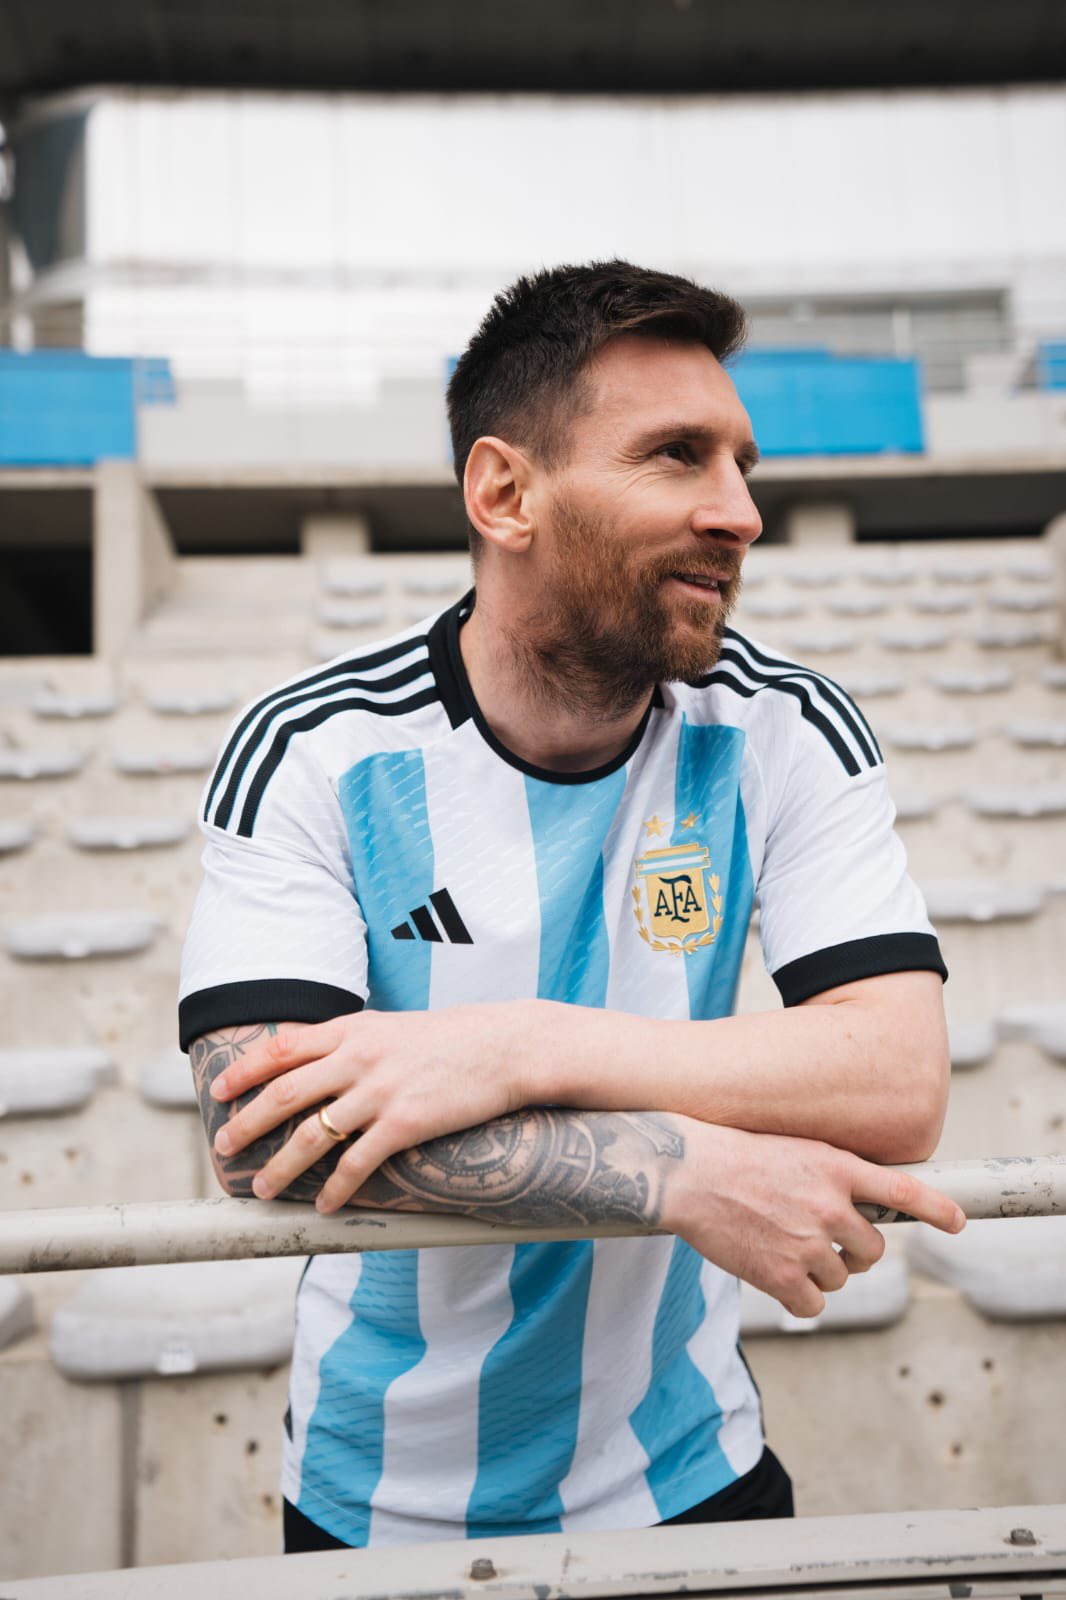 world cup jersey argentina